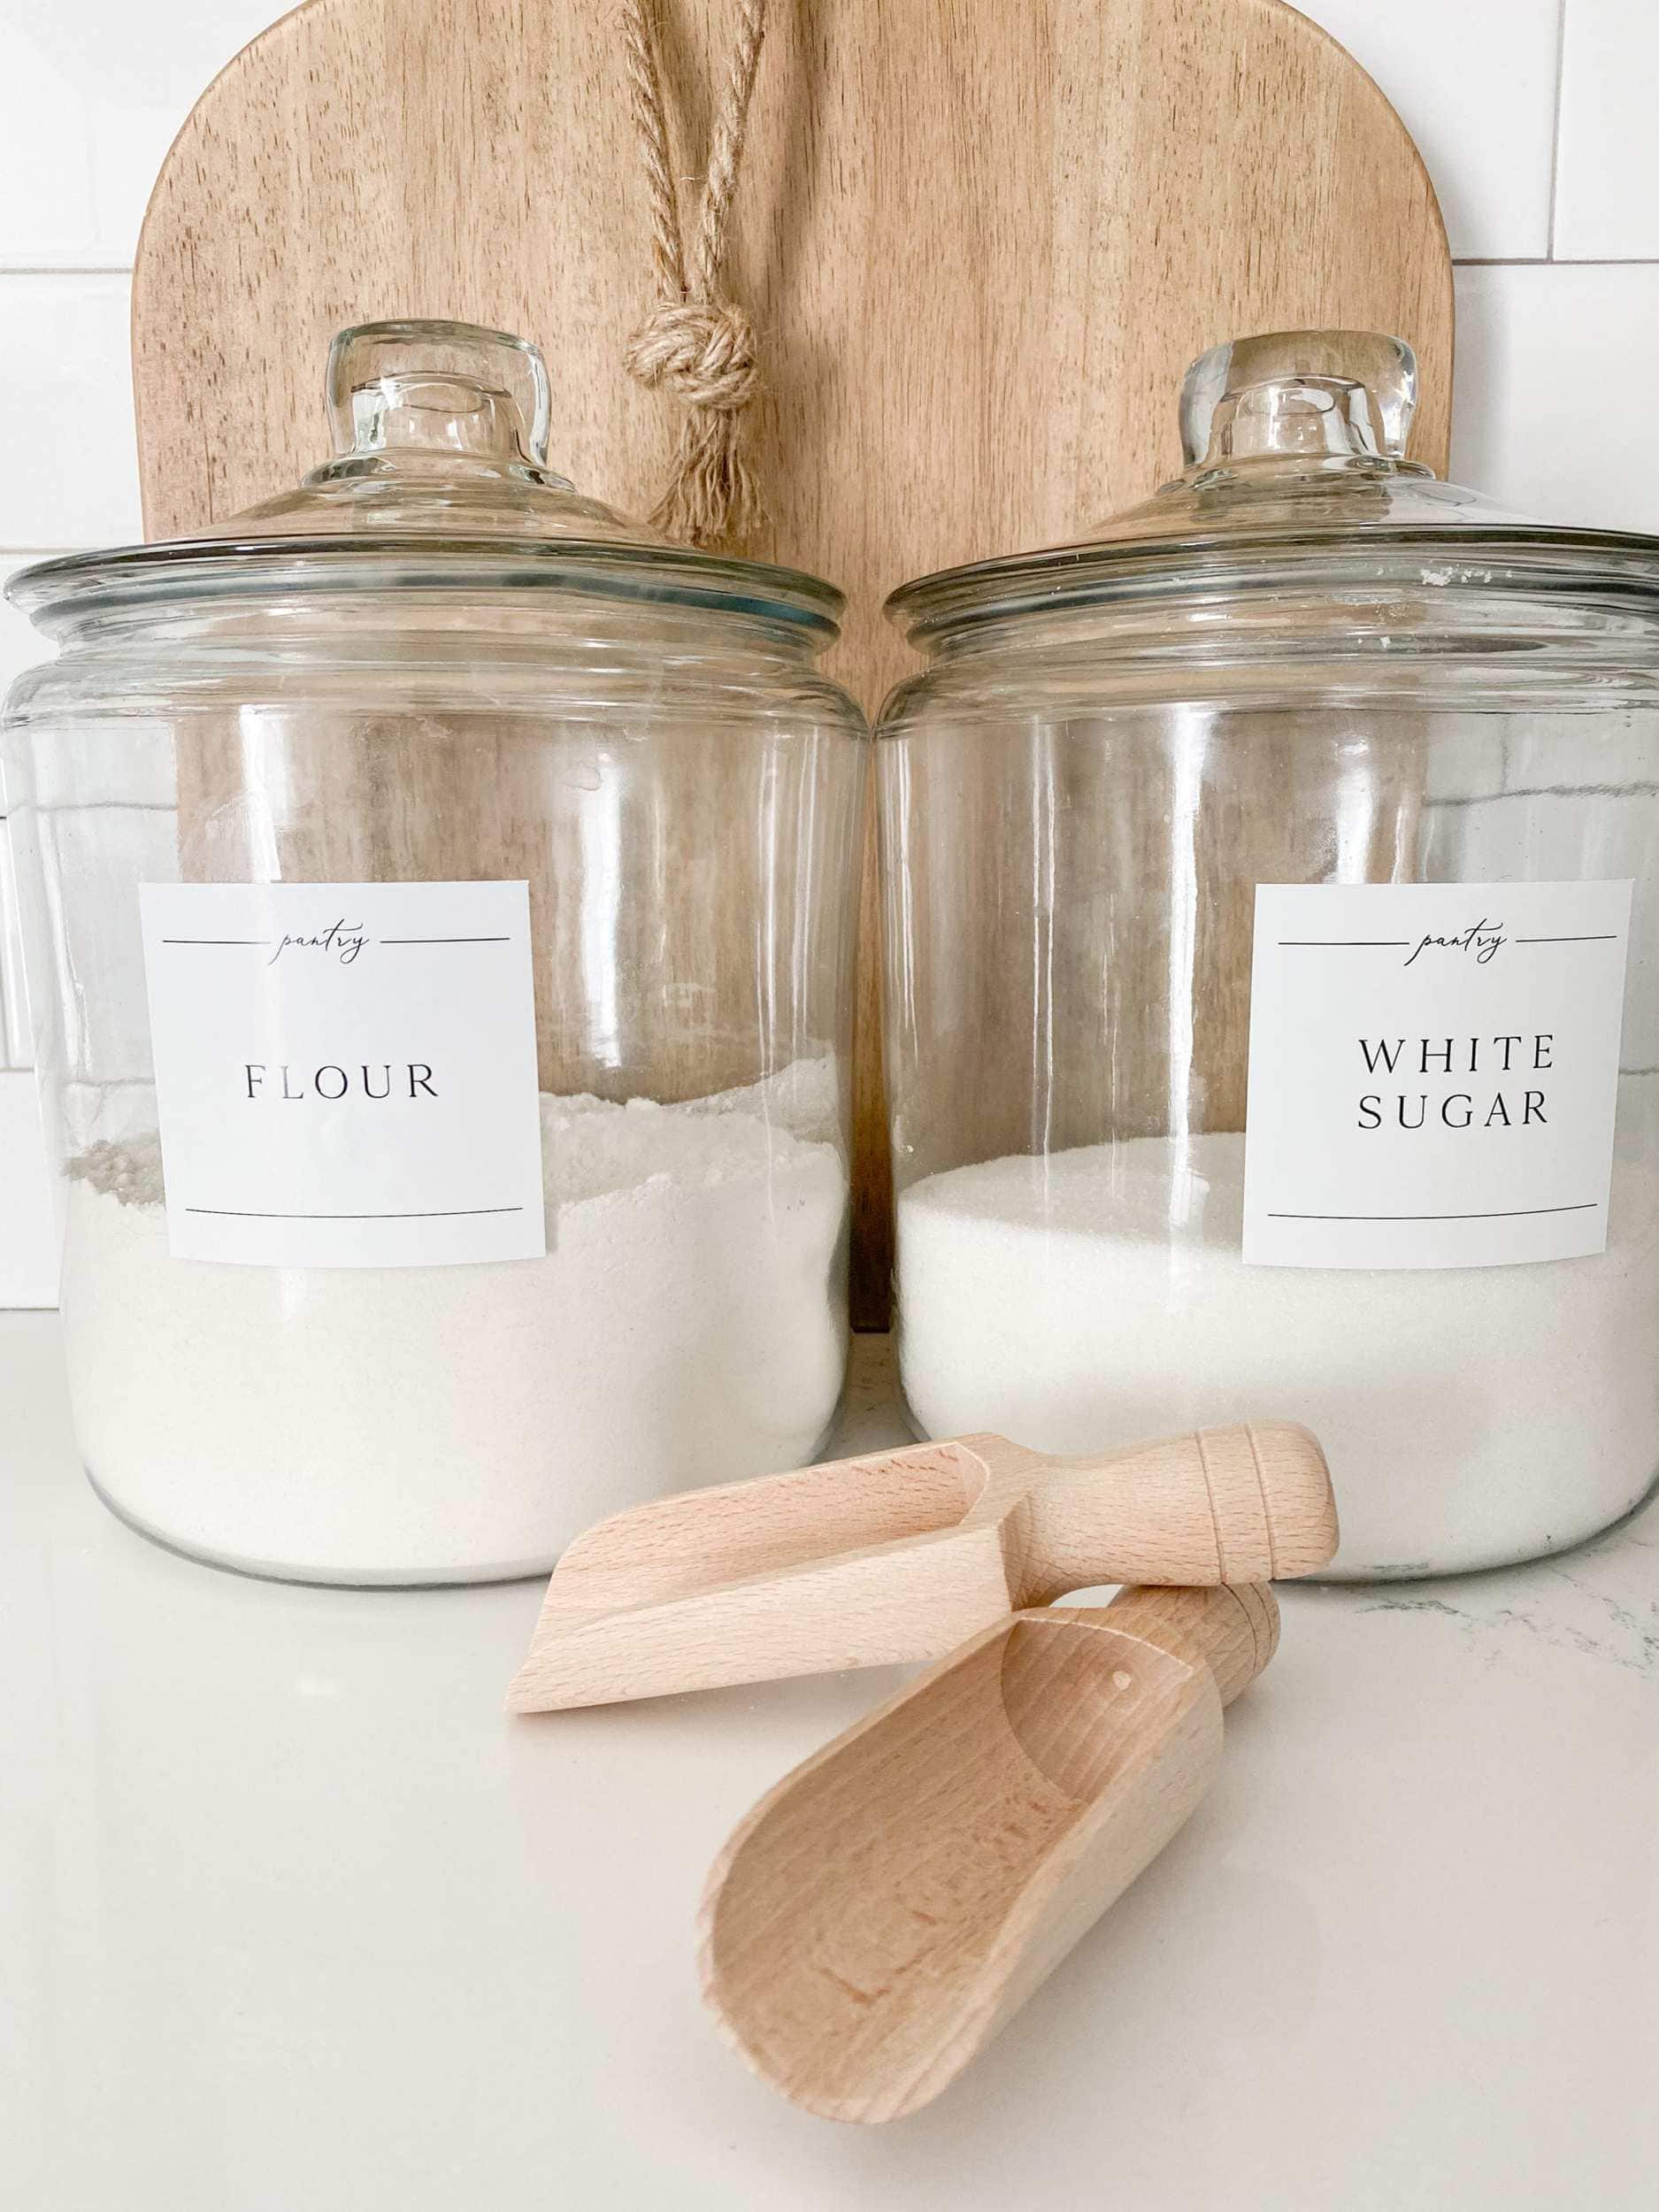 White sugar label and clear container with wooden scoop